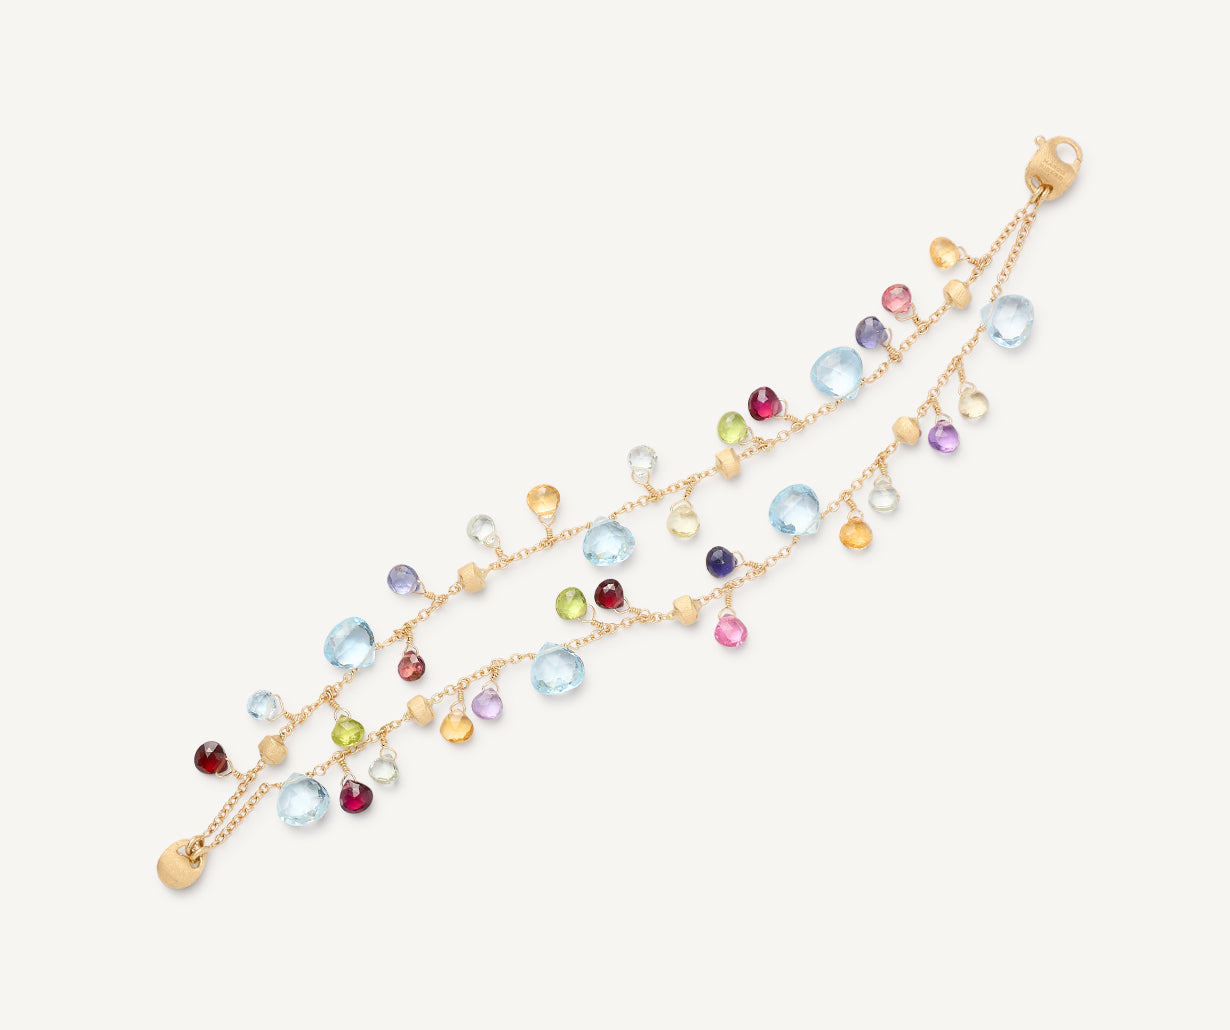 Two strand Paradise bracelet by Marco Bicego in mixed gemstones set in 18k yellow gold